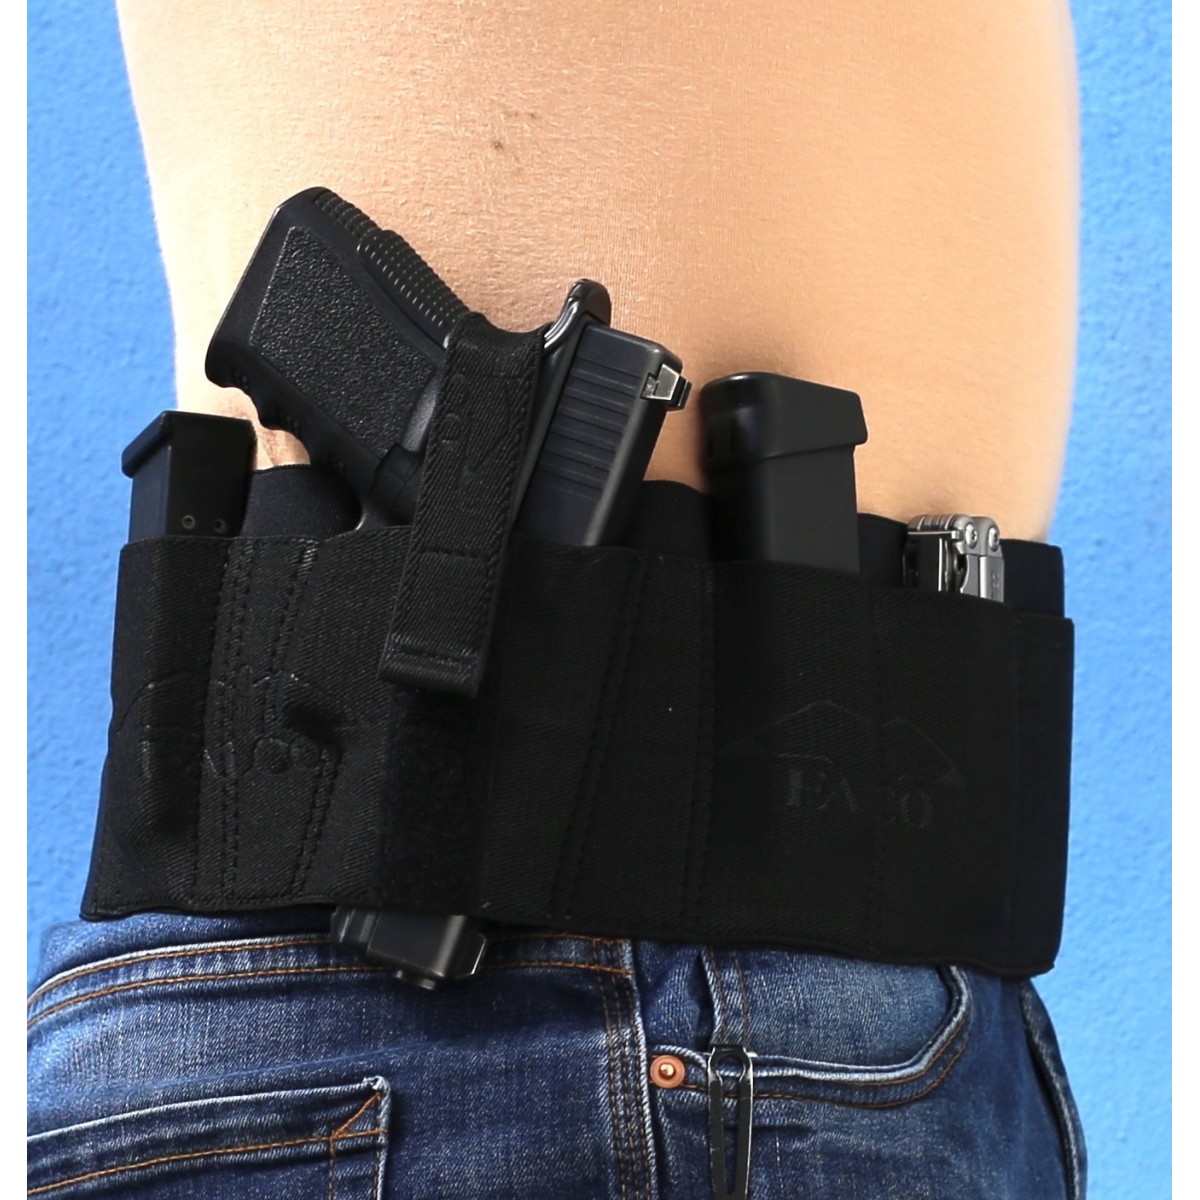  XL Belly Band Holster for Concealed Carry Up to 54